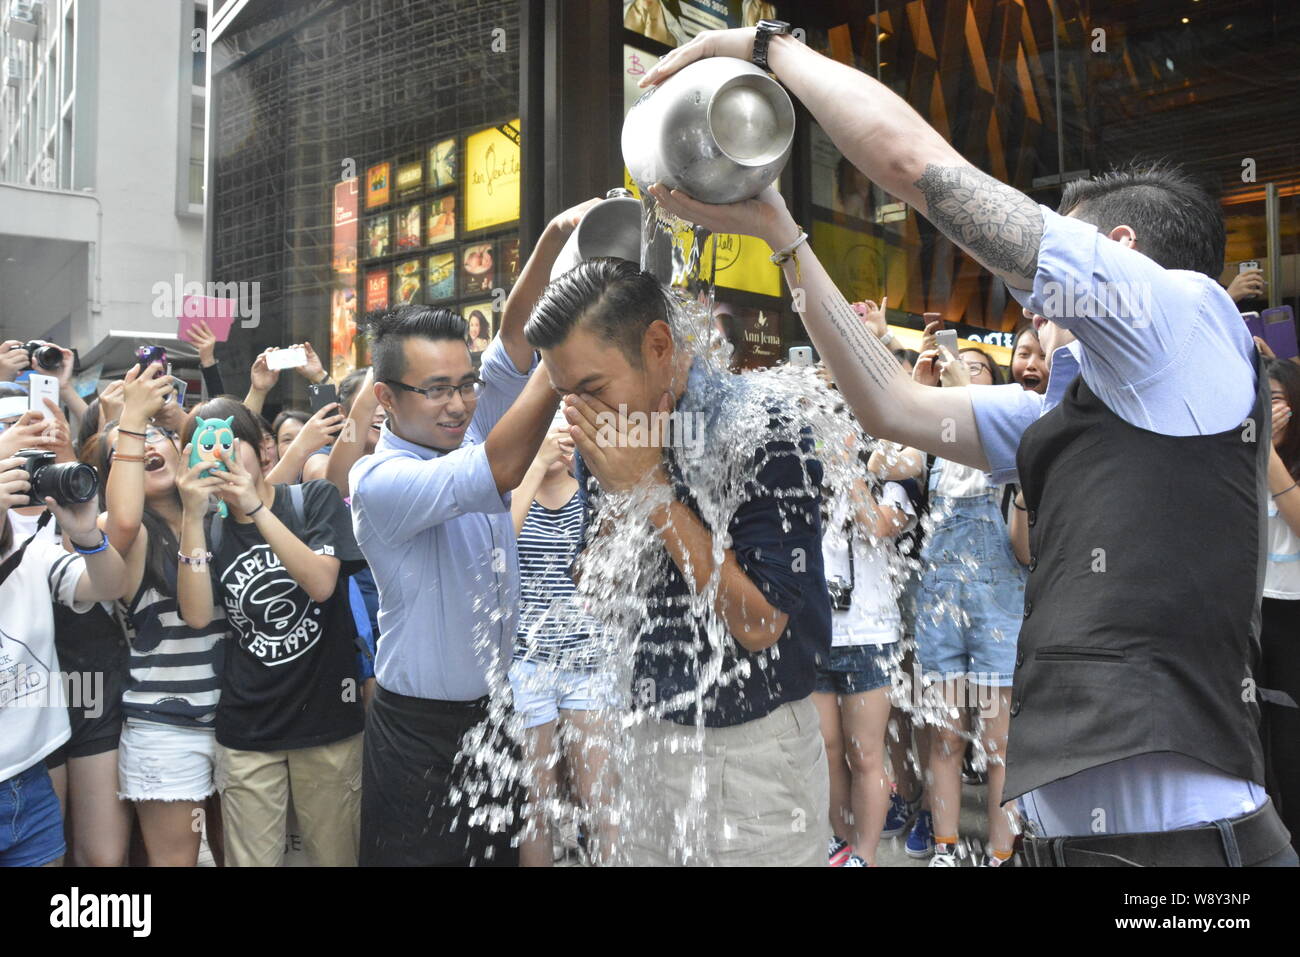 Choi Siwon of South Korean pop group Super Junior, second right, braves the Ice Bucket Challenge in Central, Hong Kong, China, 18 August 2014. Stock Photo